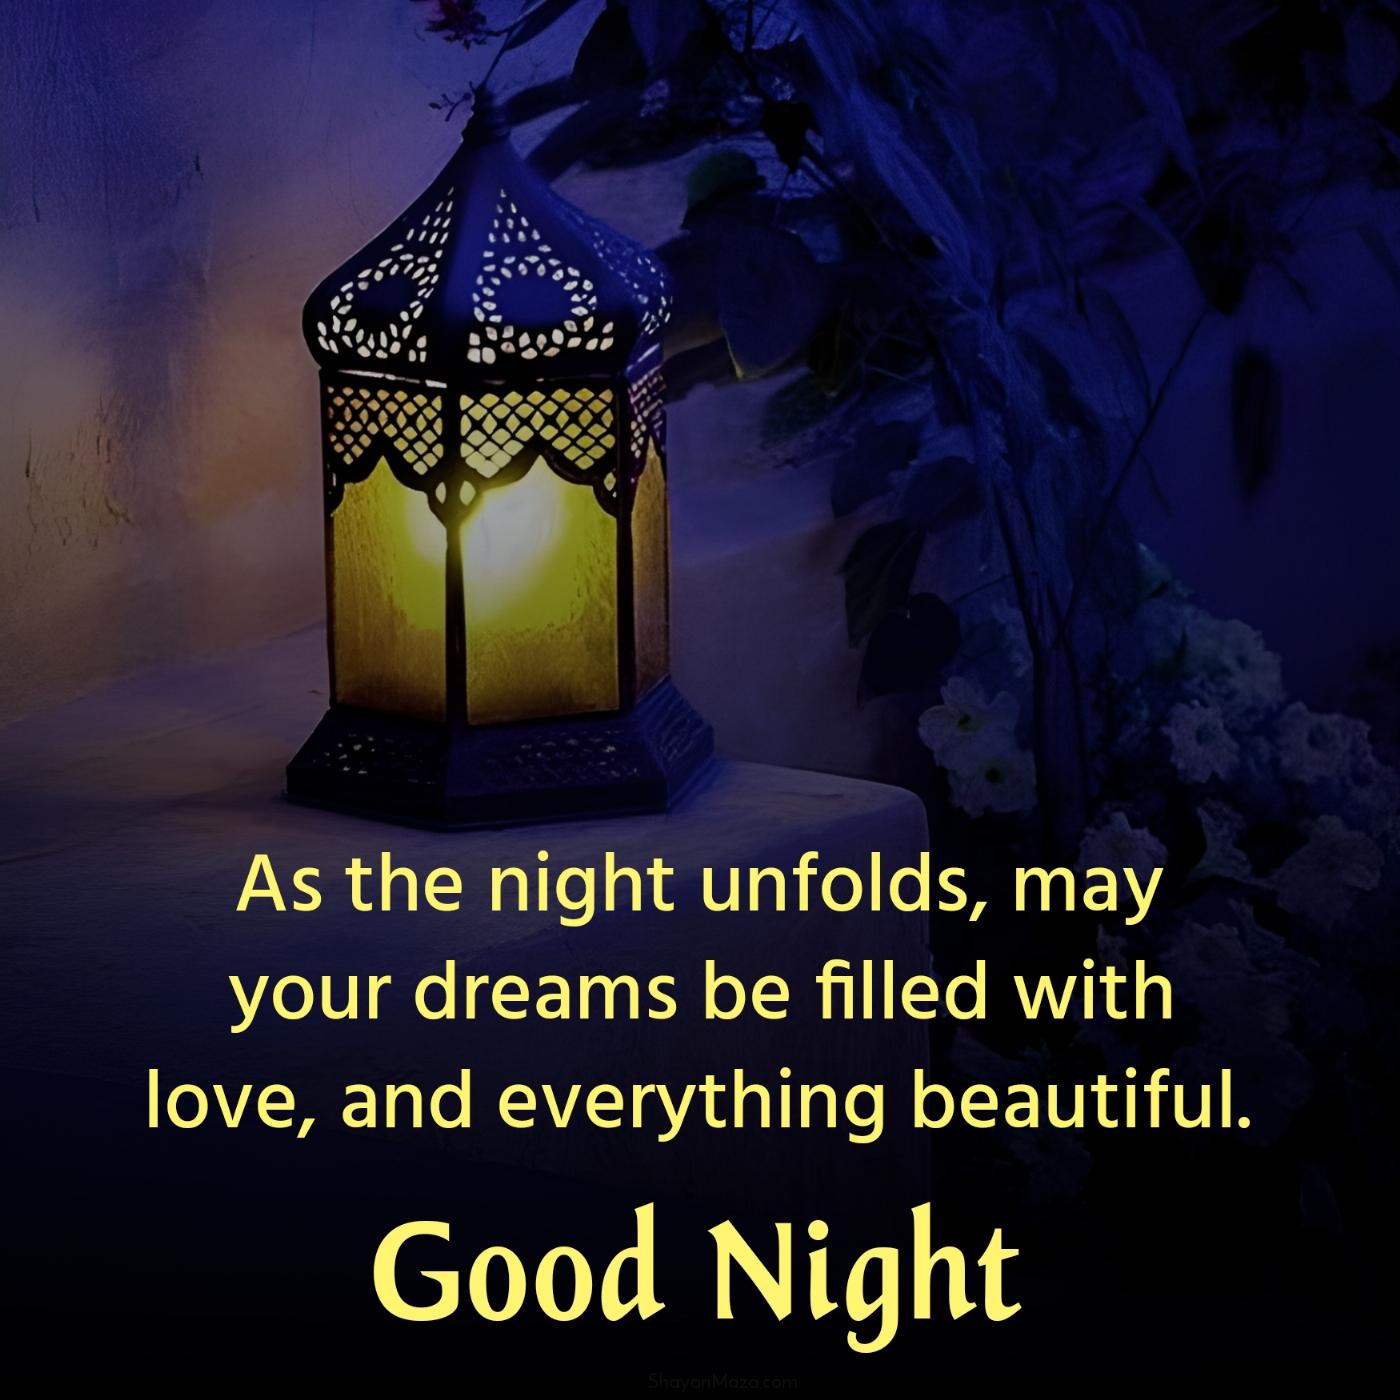 As the night unfolds may your dreams be filled with love